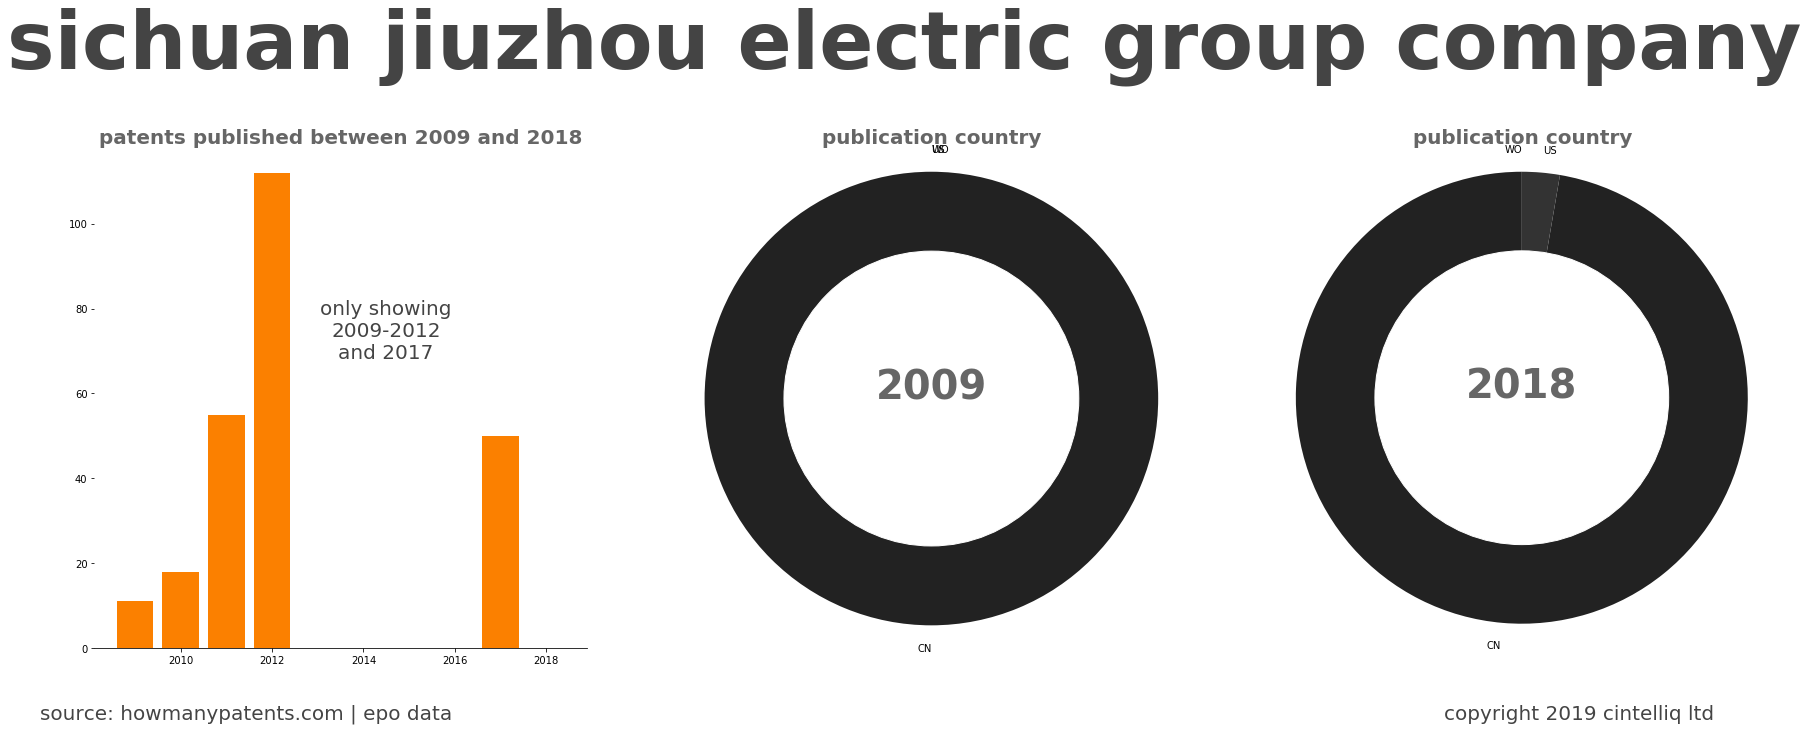 summary of patents for Sichuan Jiuzhou Electric Group Company